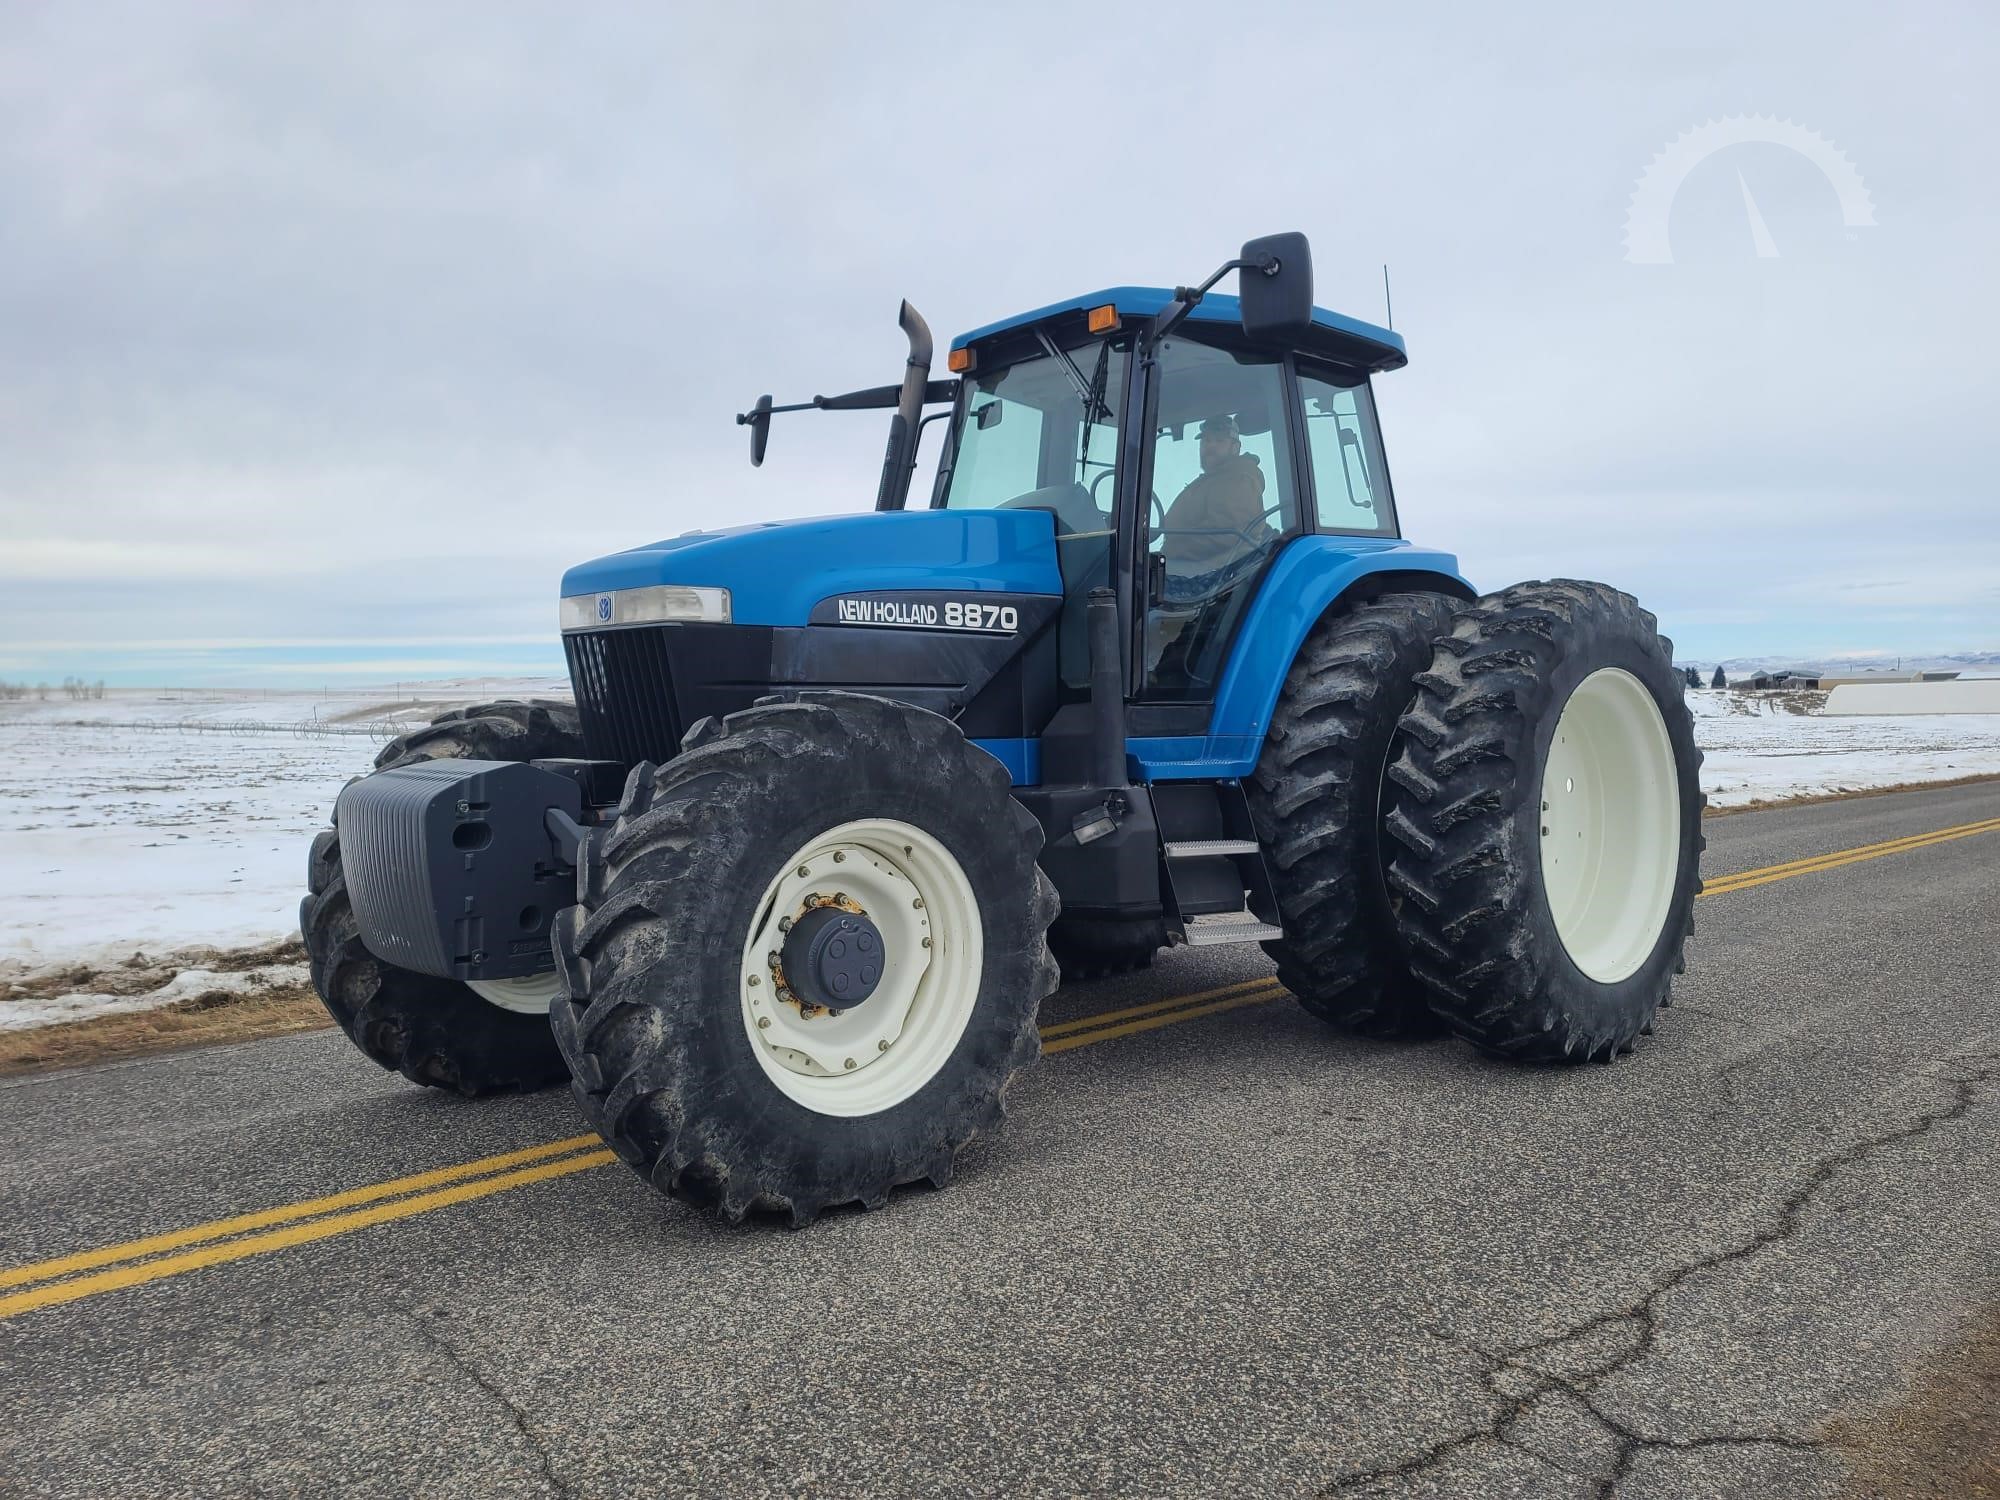 Ford New Holland 8340 with a Dual Trumpet Air Horn installed